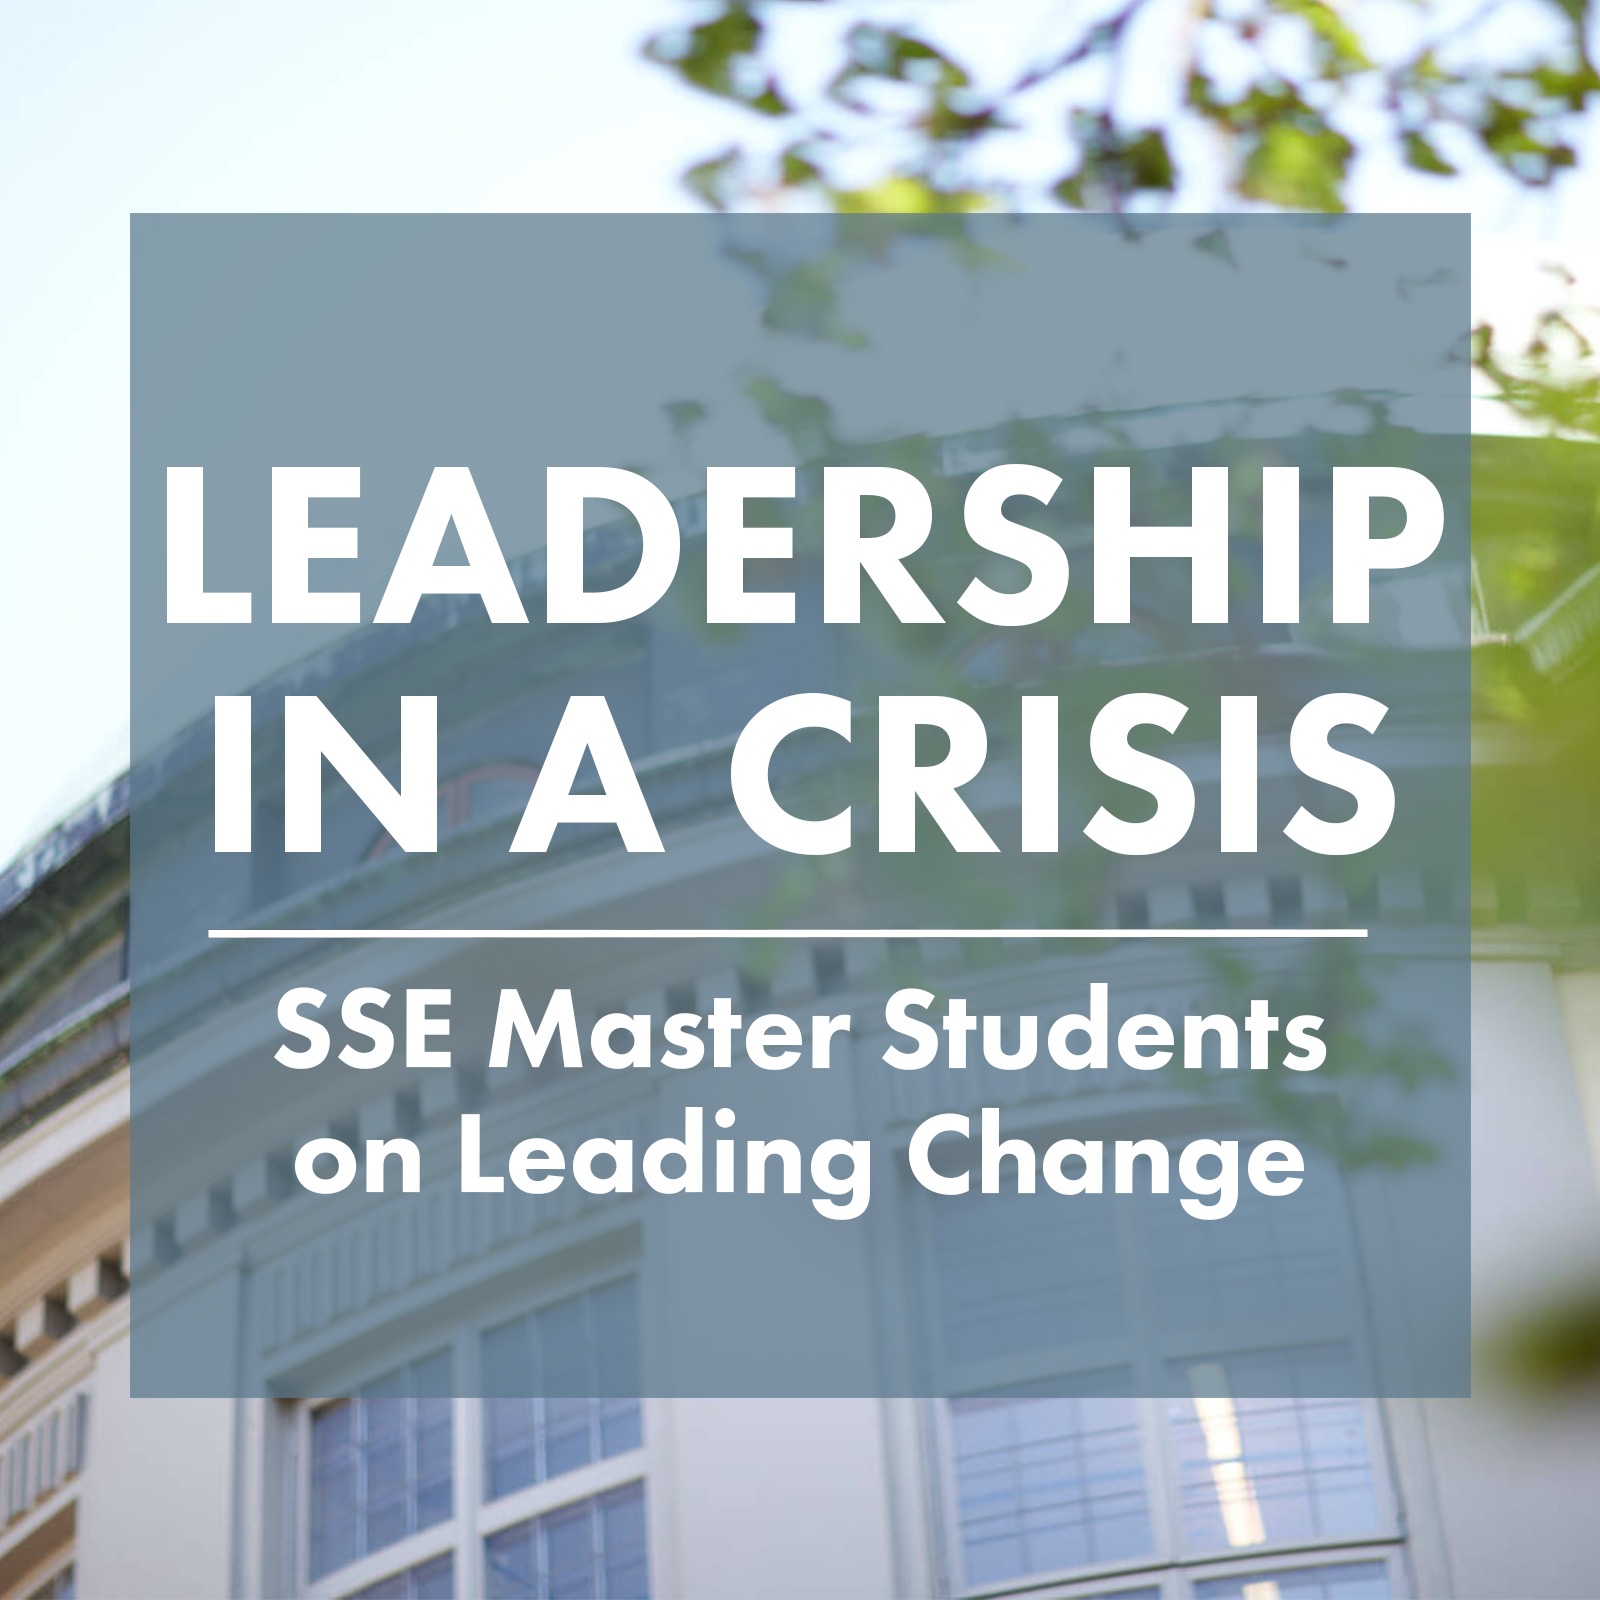 Leadership in a crisis